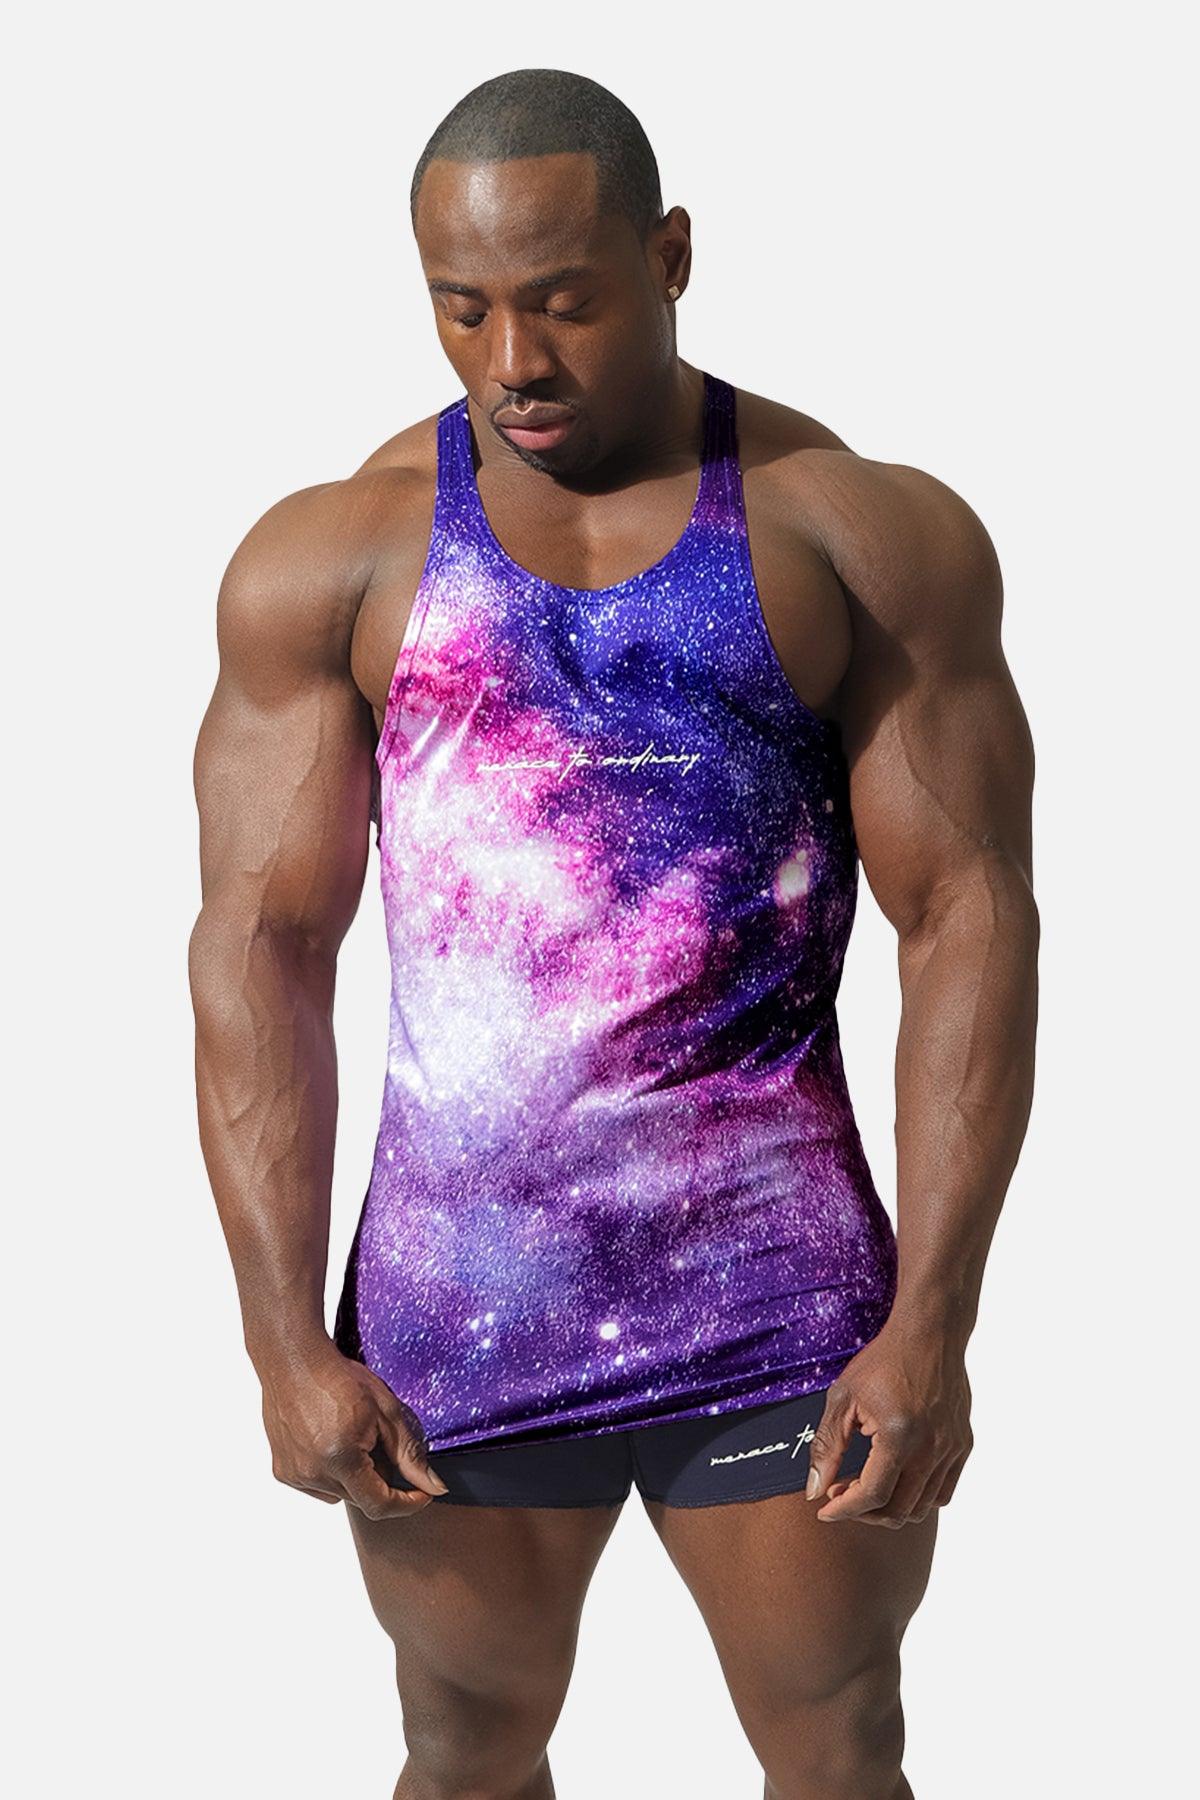 Old School Workout Stringer 2.0 - Galaxy - Jed North